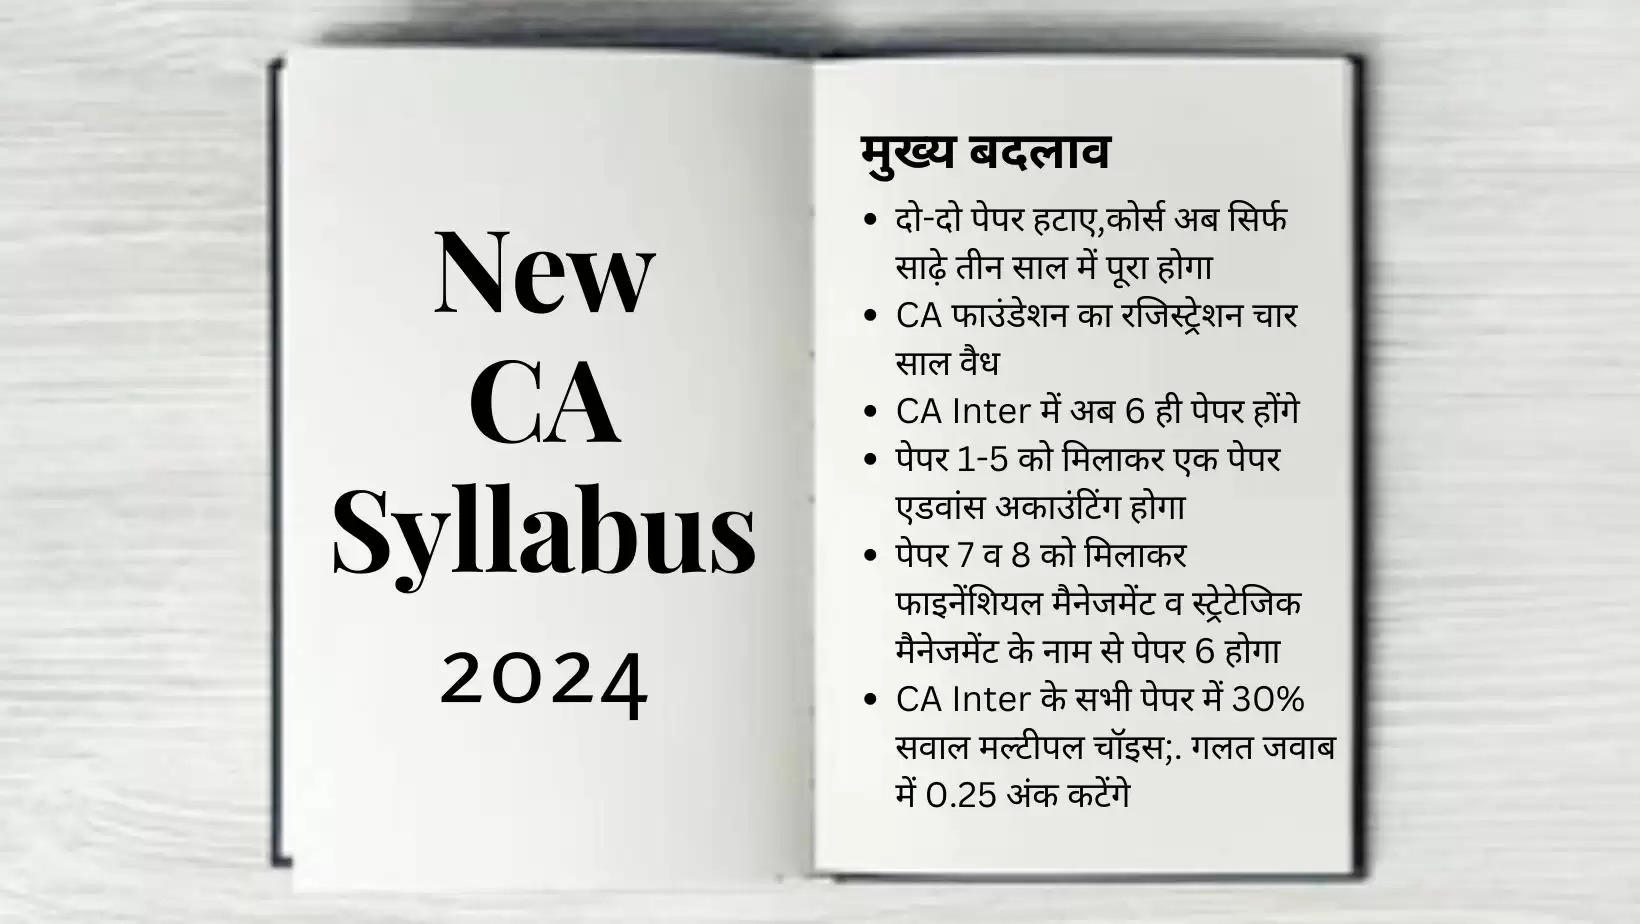 New Changes to CA Syllabus 2024 CA Foundation Validity, New CA Inter Syllabus, CA Final Syllabus 2024